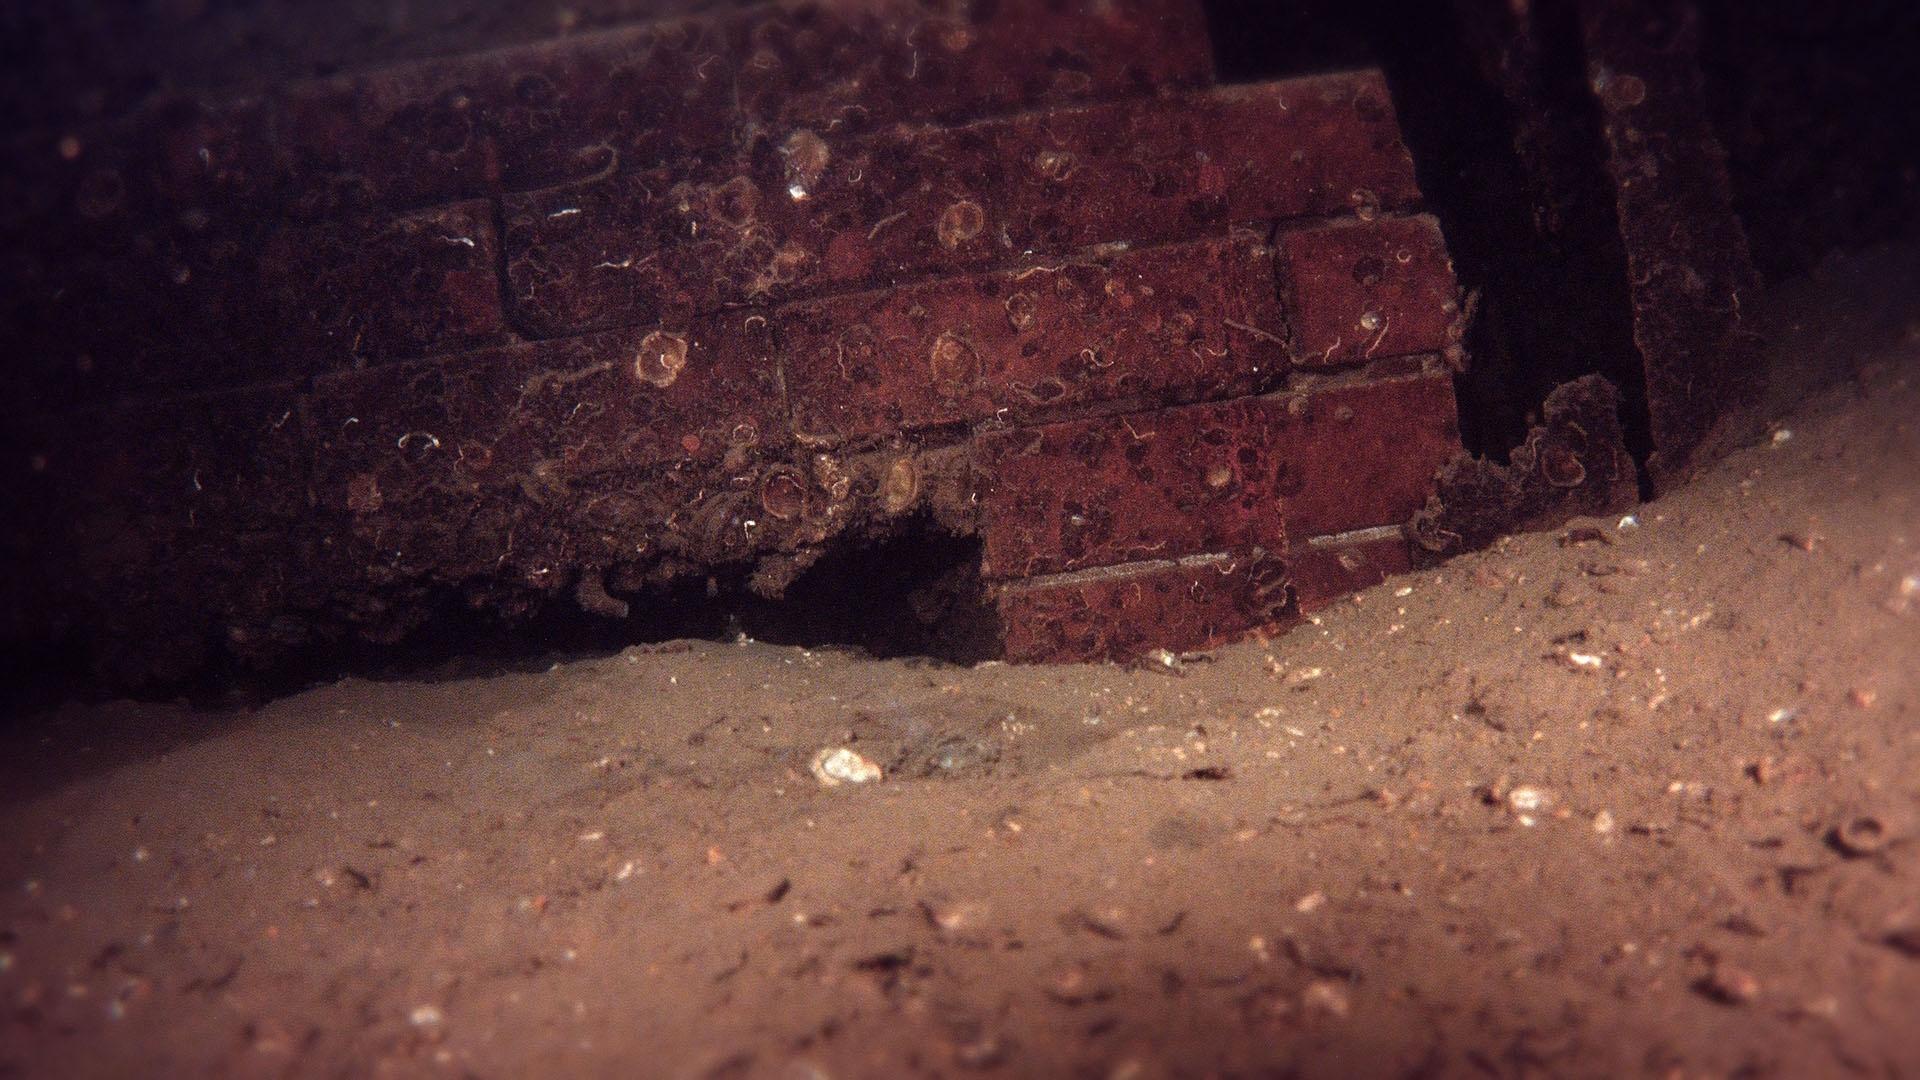 A fireplace within the USS Arizona, found in the Admiral's Cabin.